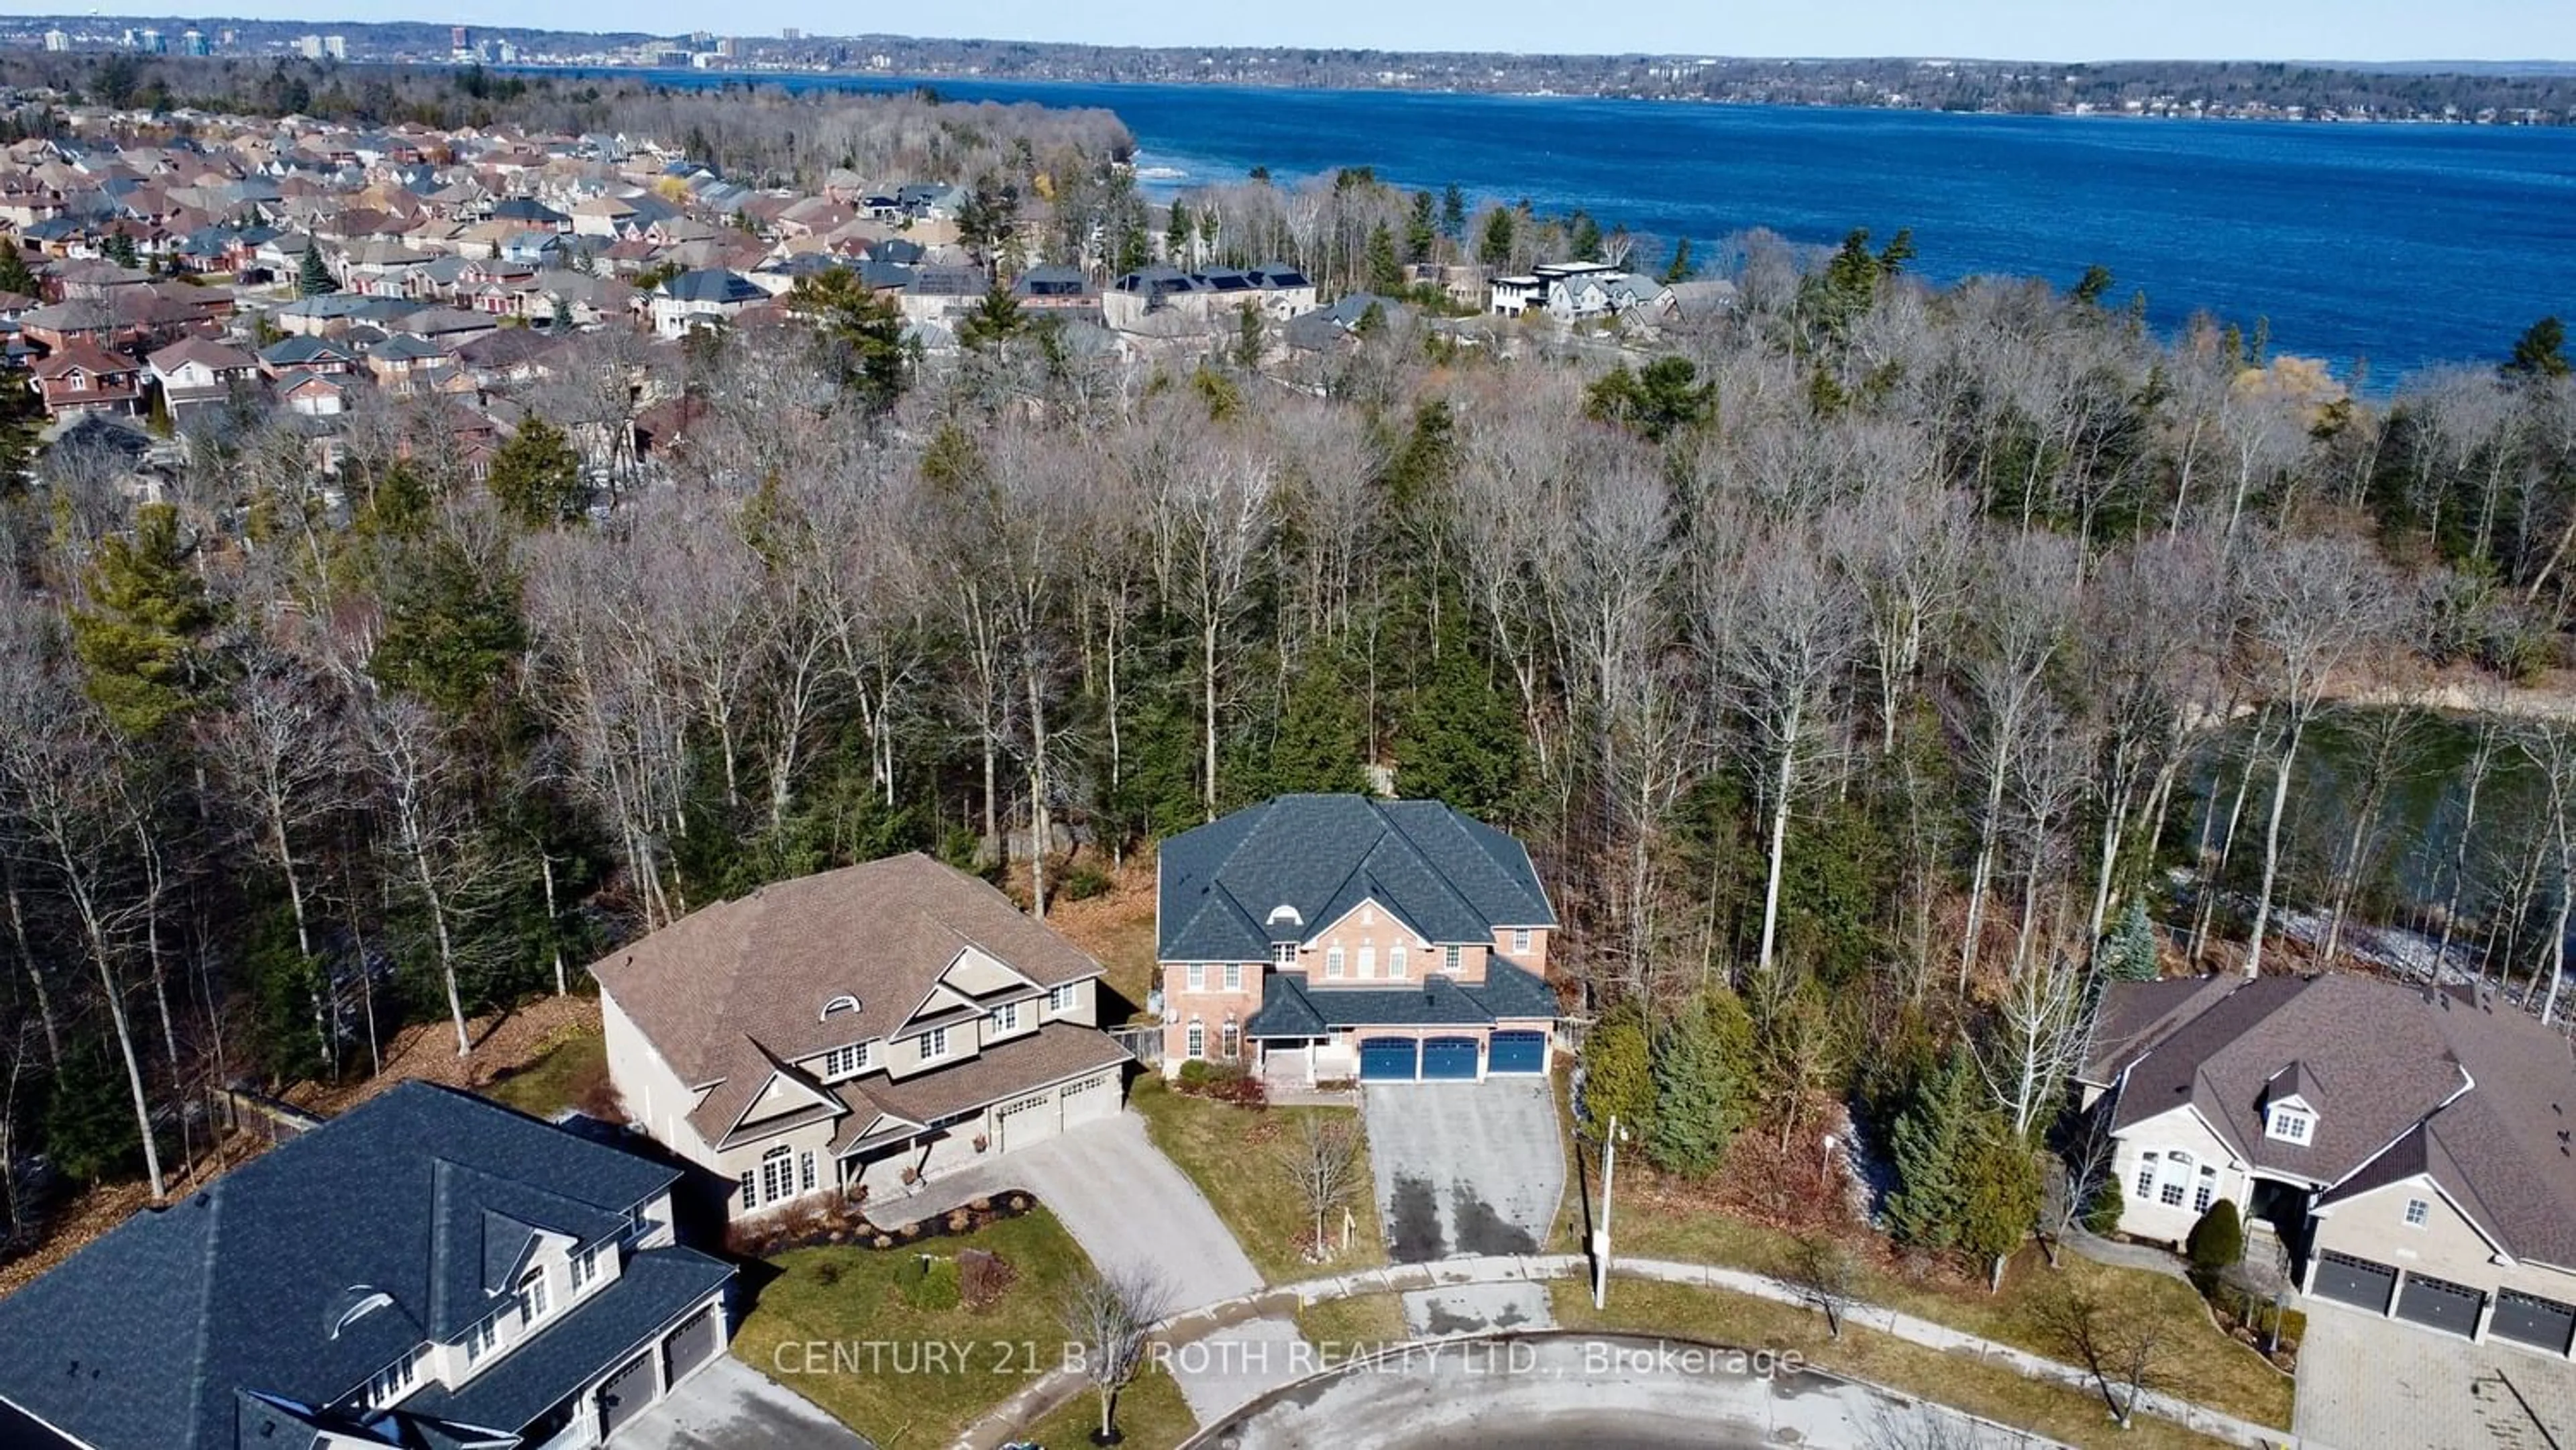 Lakeview for 41 Camelot Sq, Barrie Ontario L4M 0C3